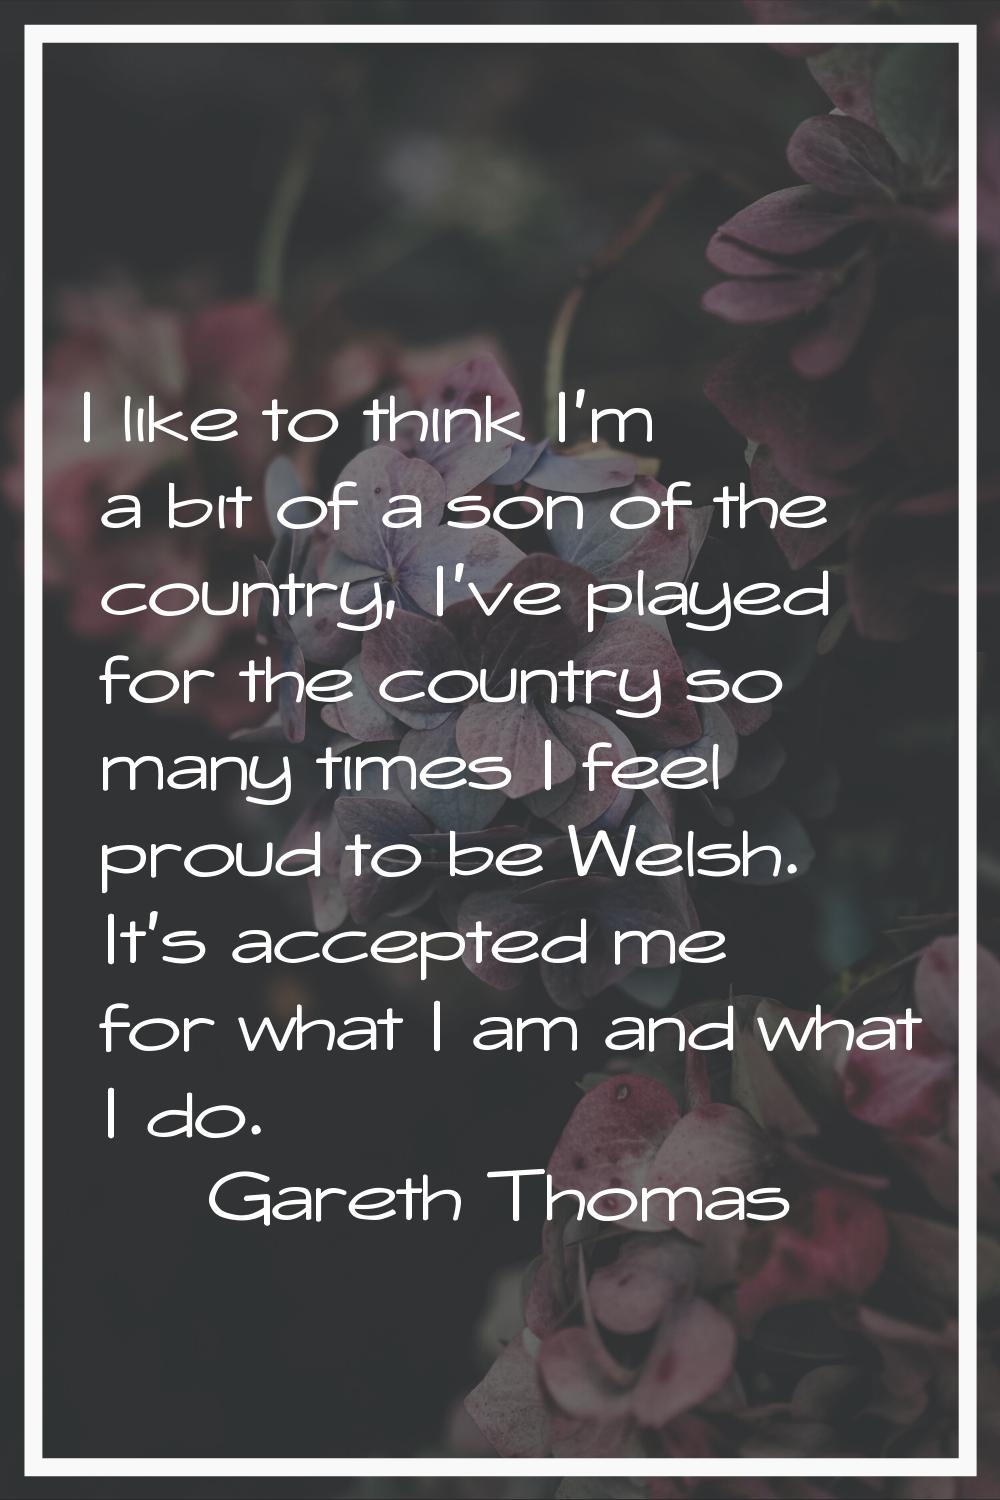 I like to think I'm a bit of a son of the country, I've played for the country so many times I feel